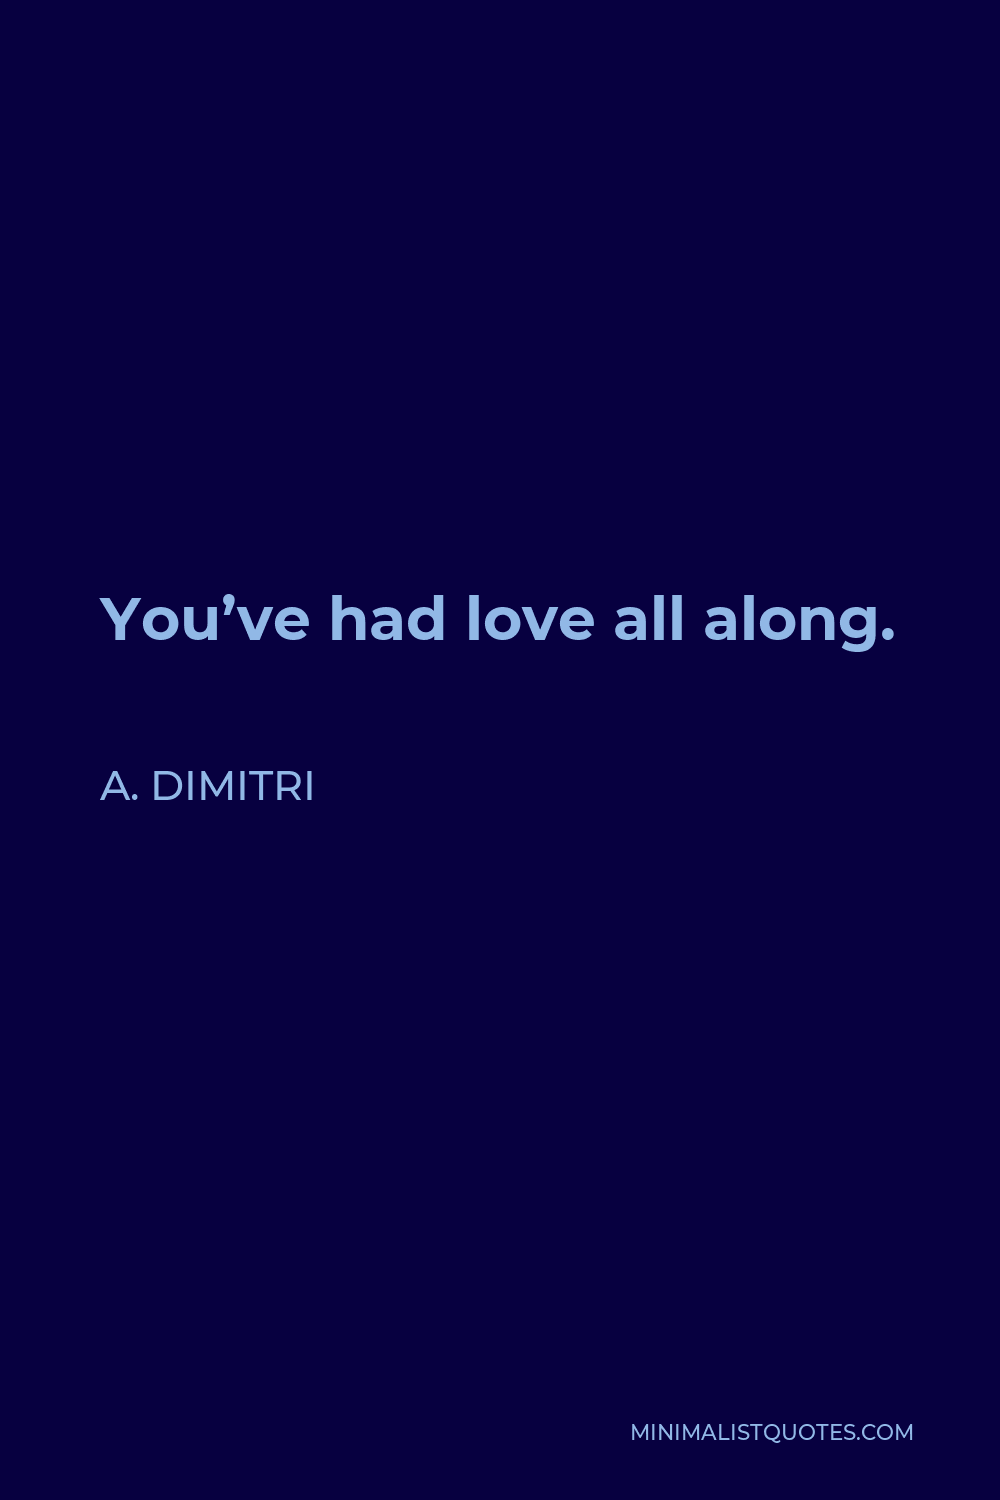 A. Dimitri Quote - You’ve had love all along.